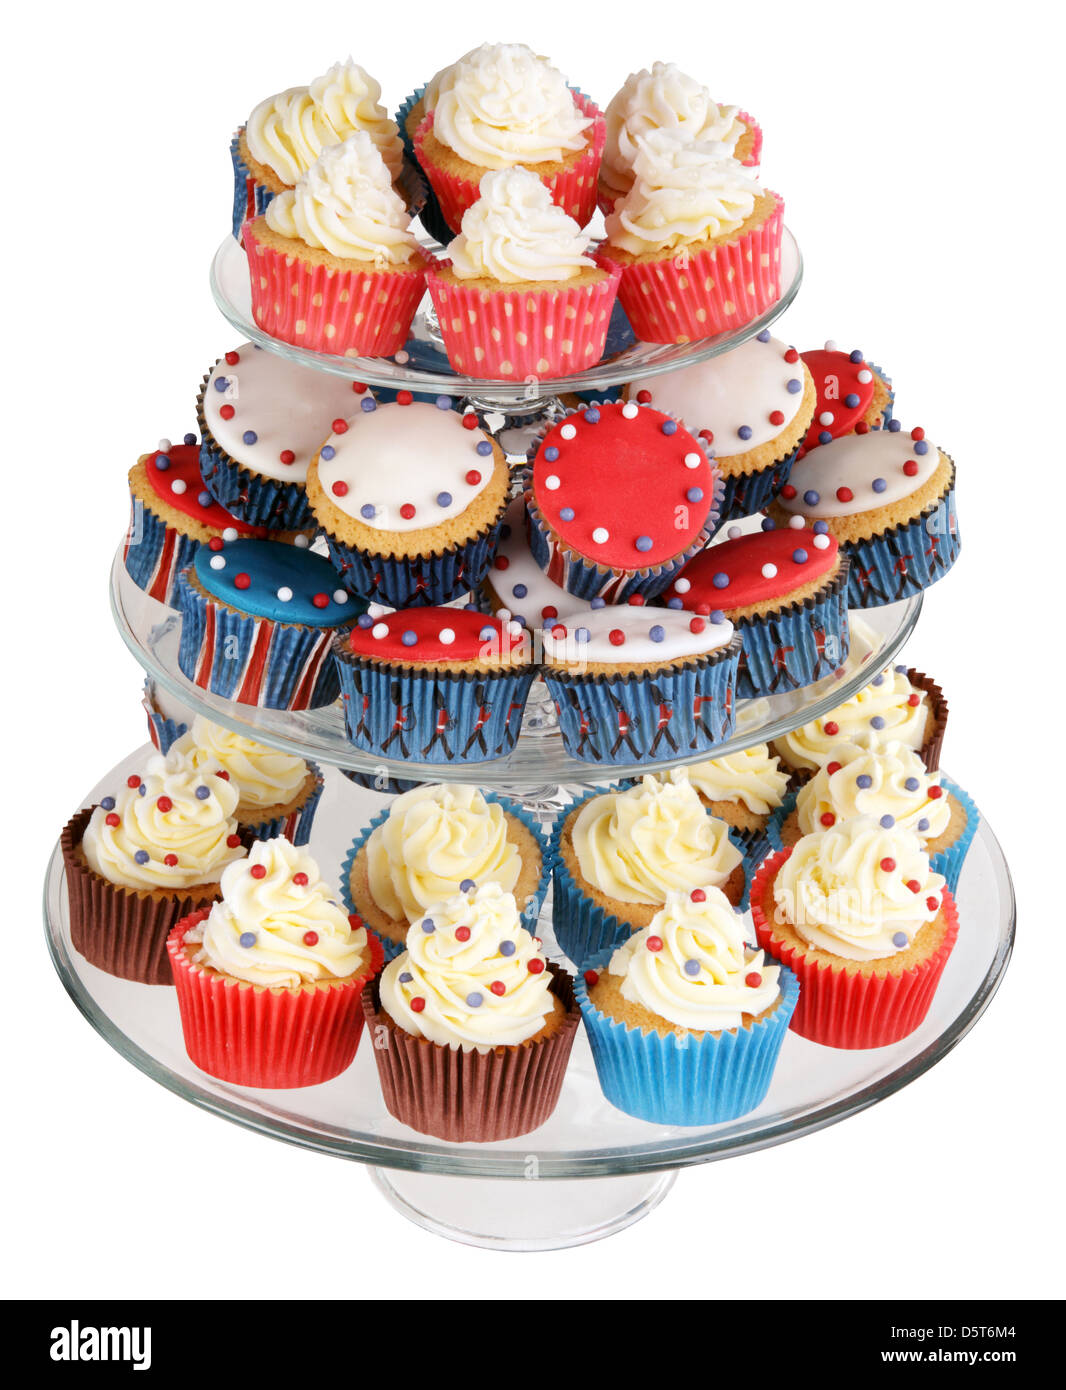 Rouge, blanc et bleu CUPCAKES ON CAKE STAND Banque D'Images